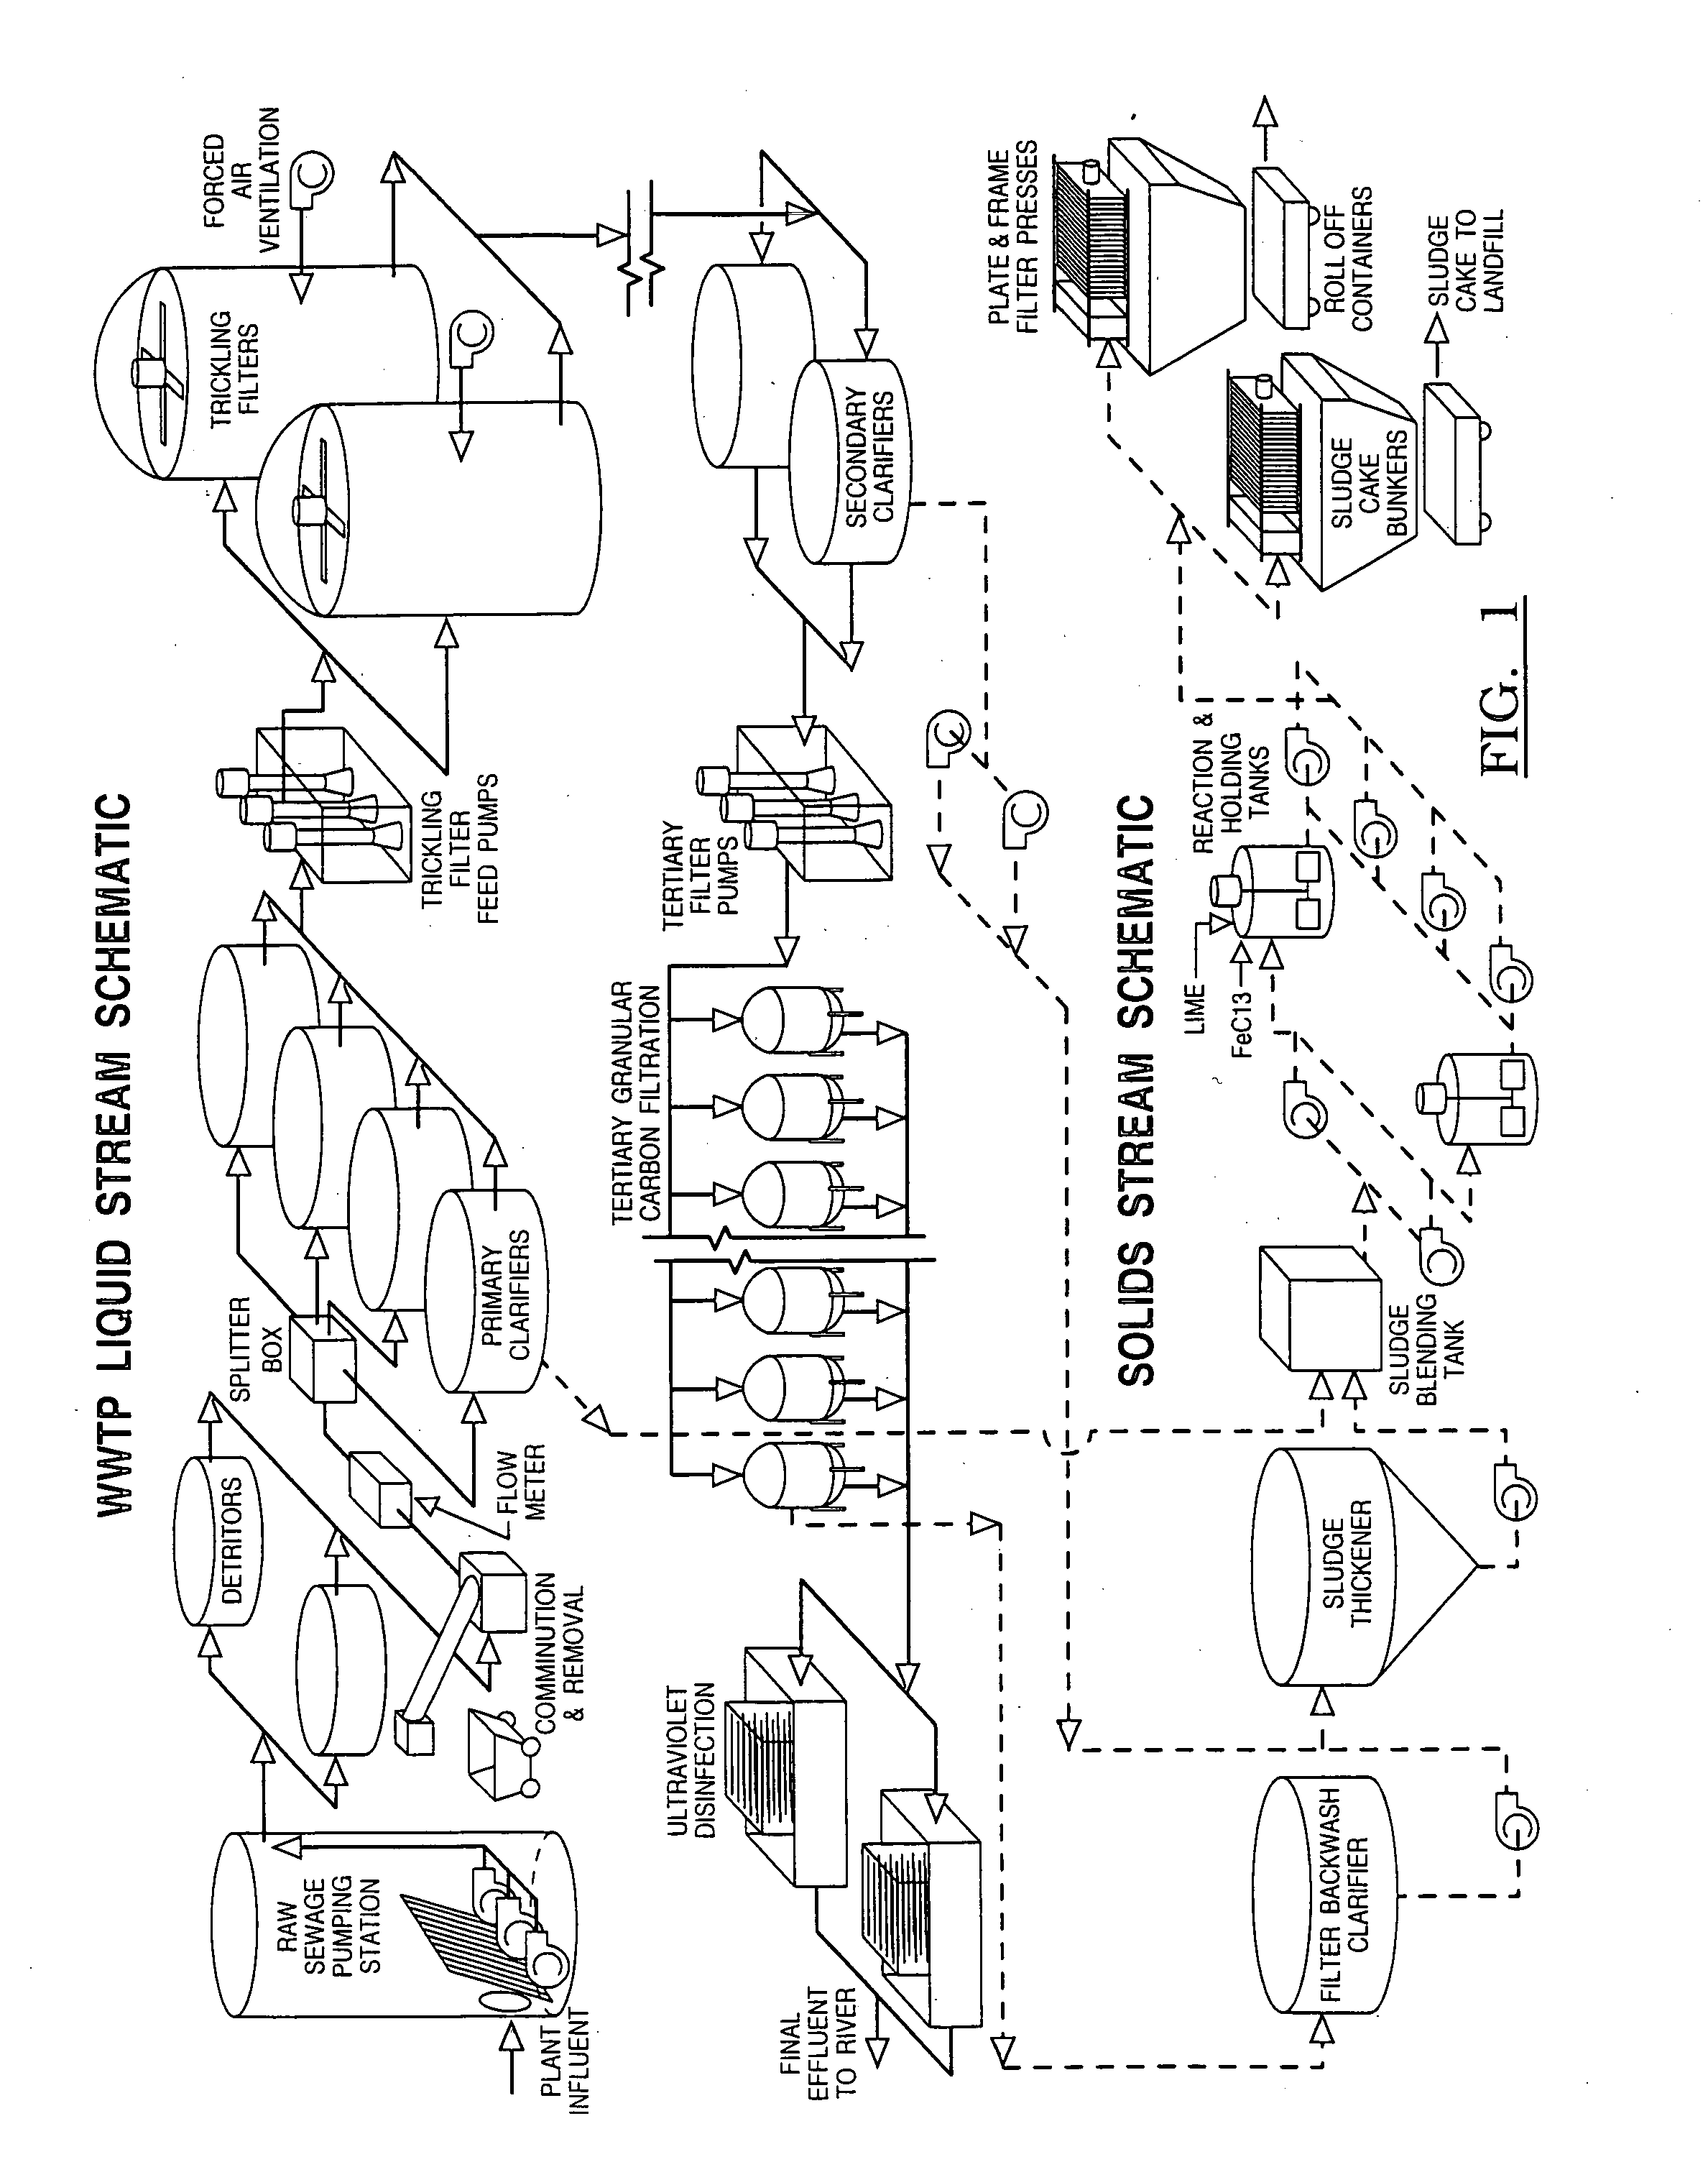 Carbon filtration process and apparatus for removing PCB's and other compounds from wastewater